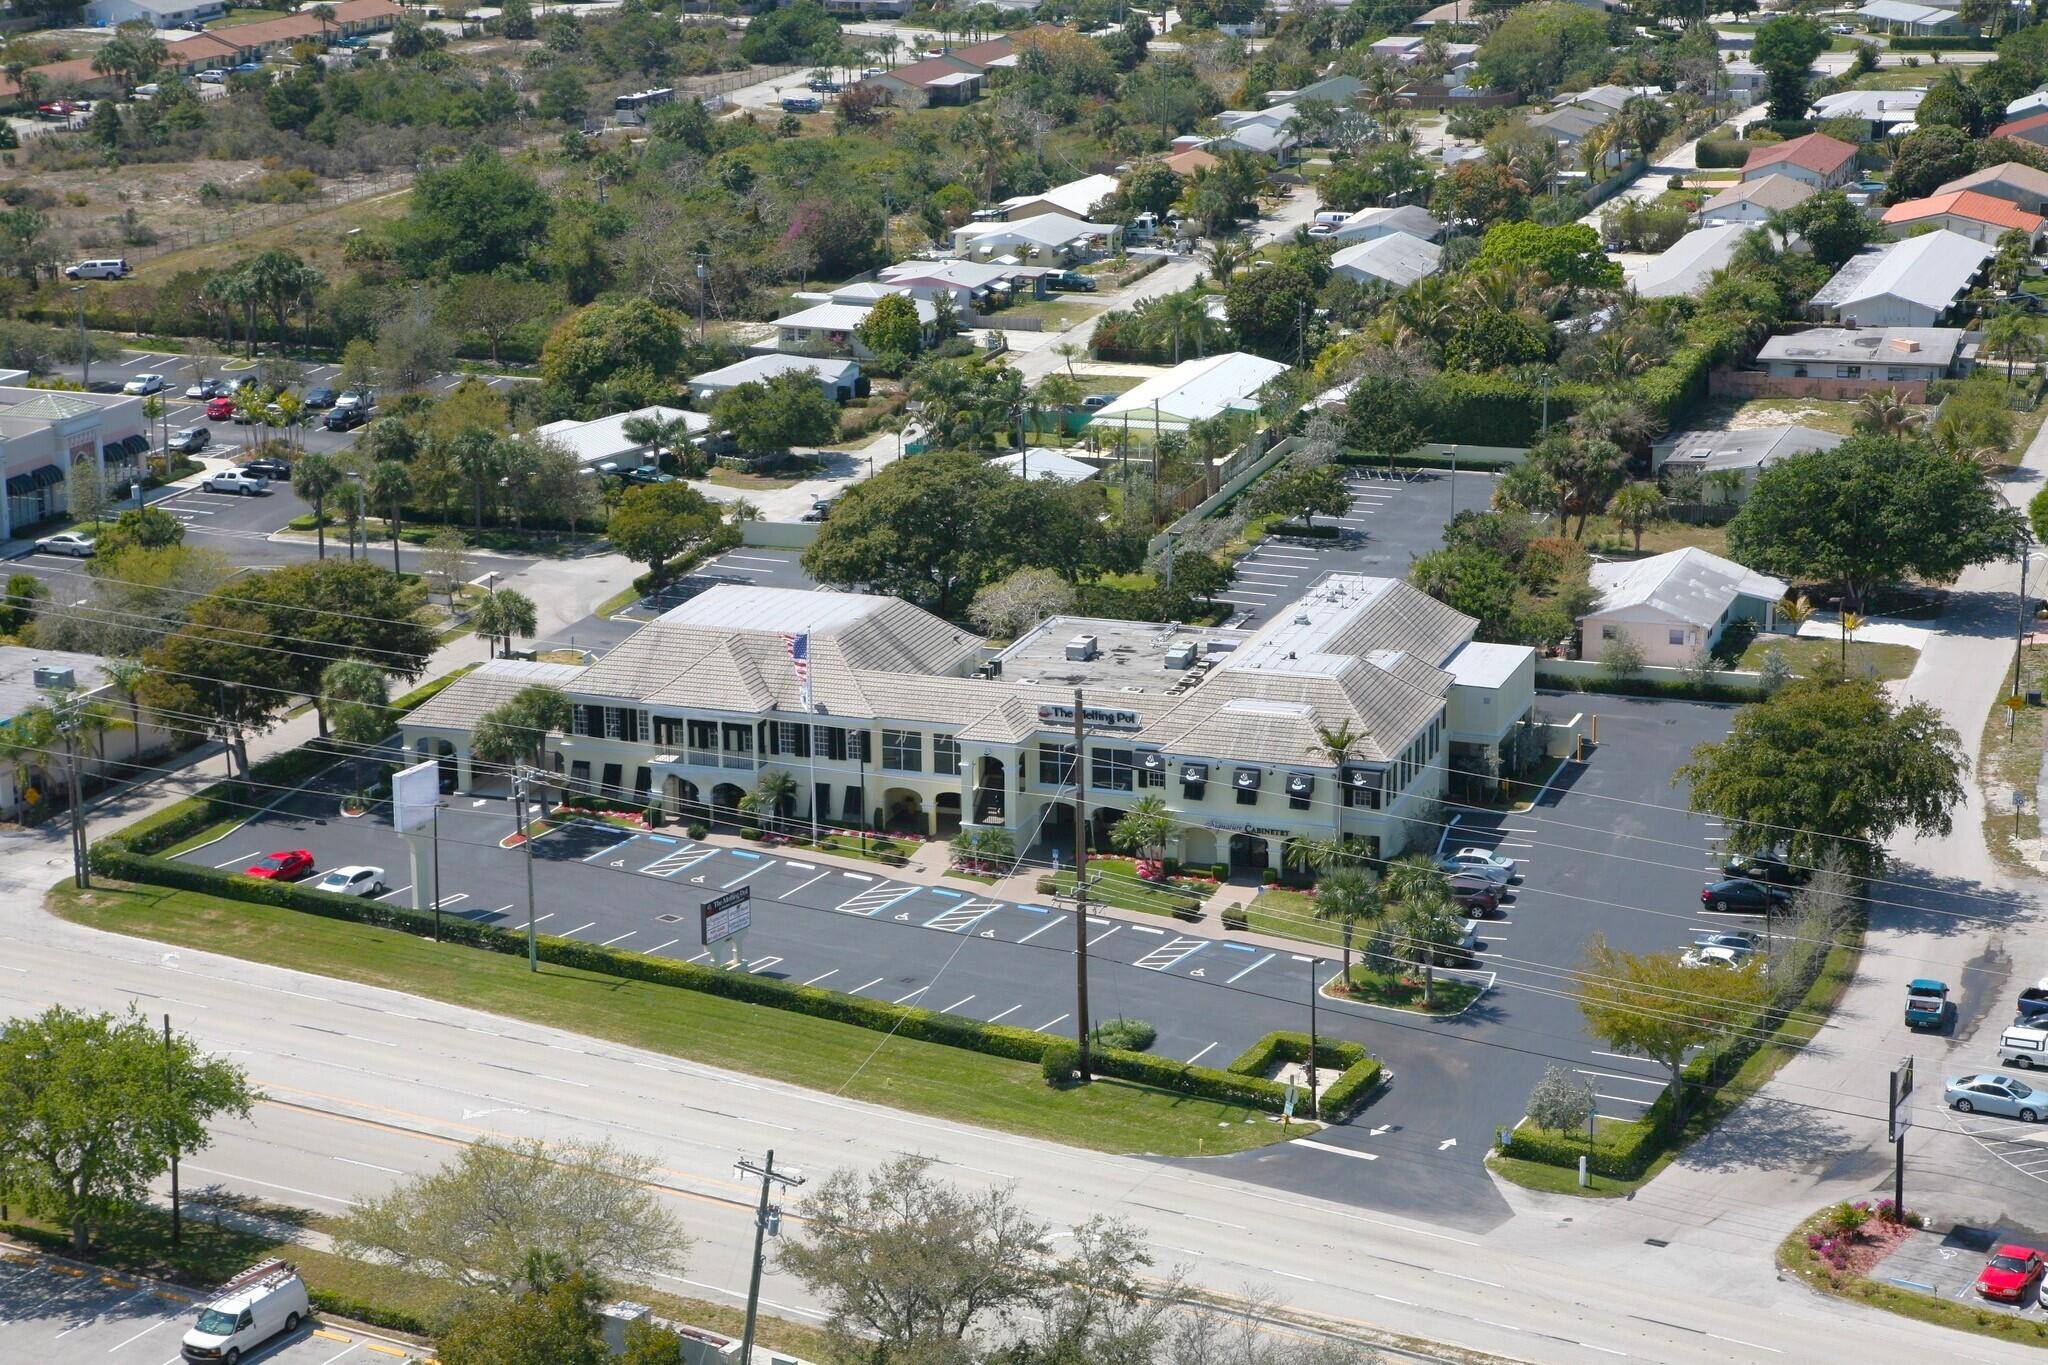 4, 280 SF fully furnished office sublease with multiple private offices, conference room, and a large bullpen area with 16 workstations.